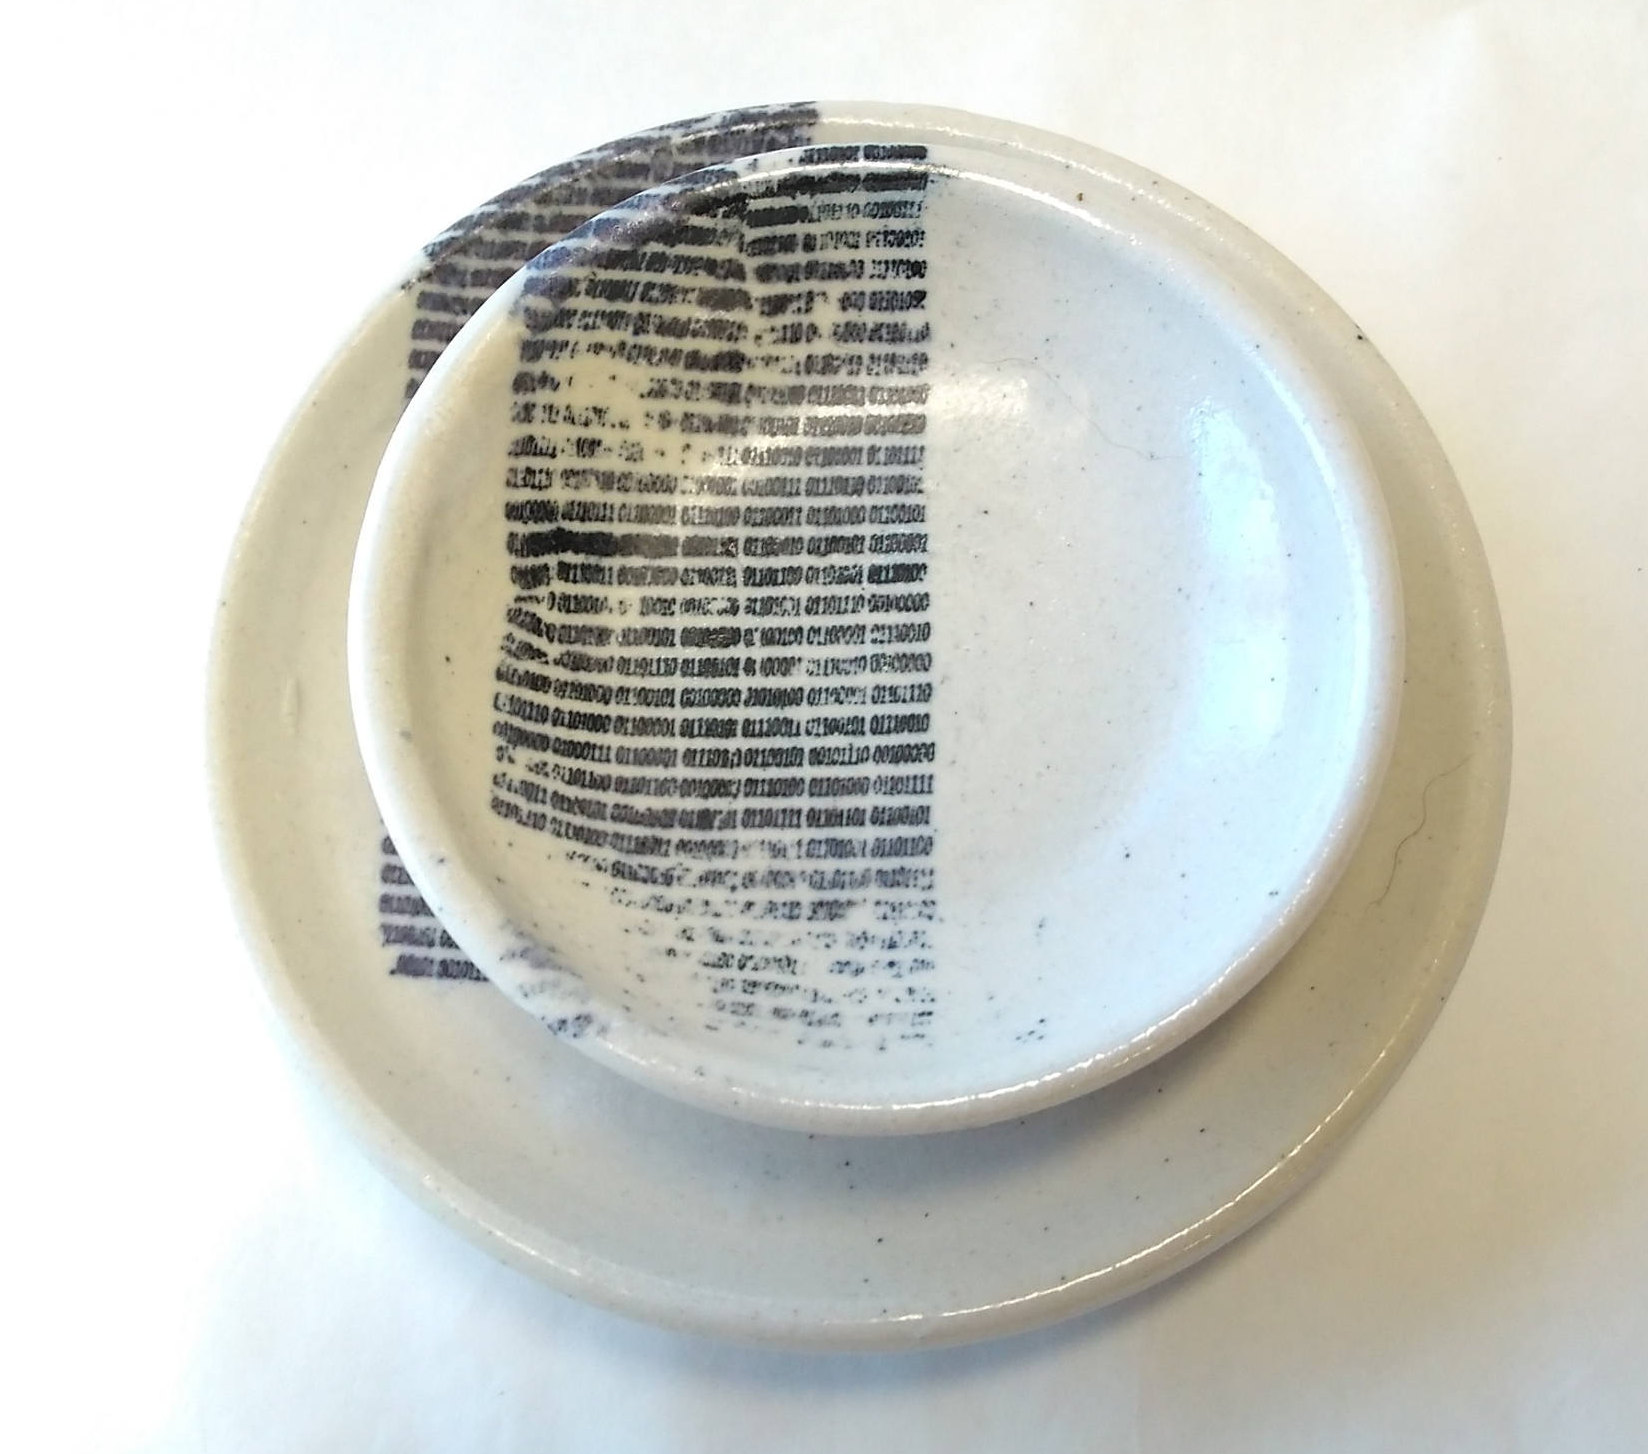 Developers will love this set of binary code plates